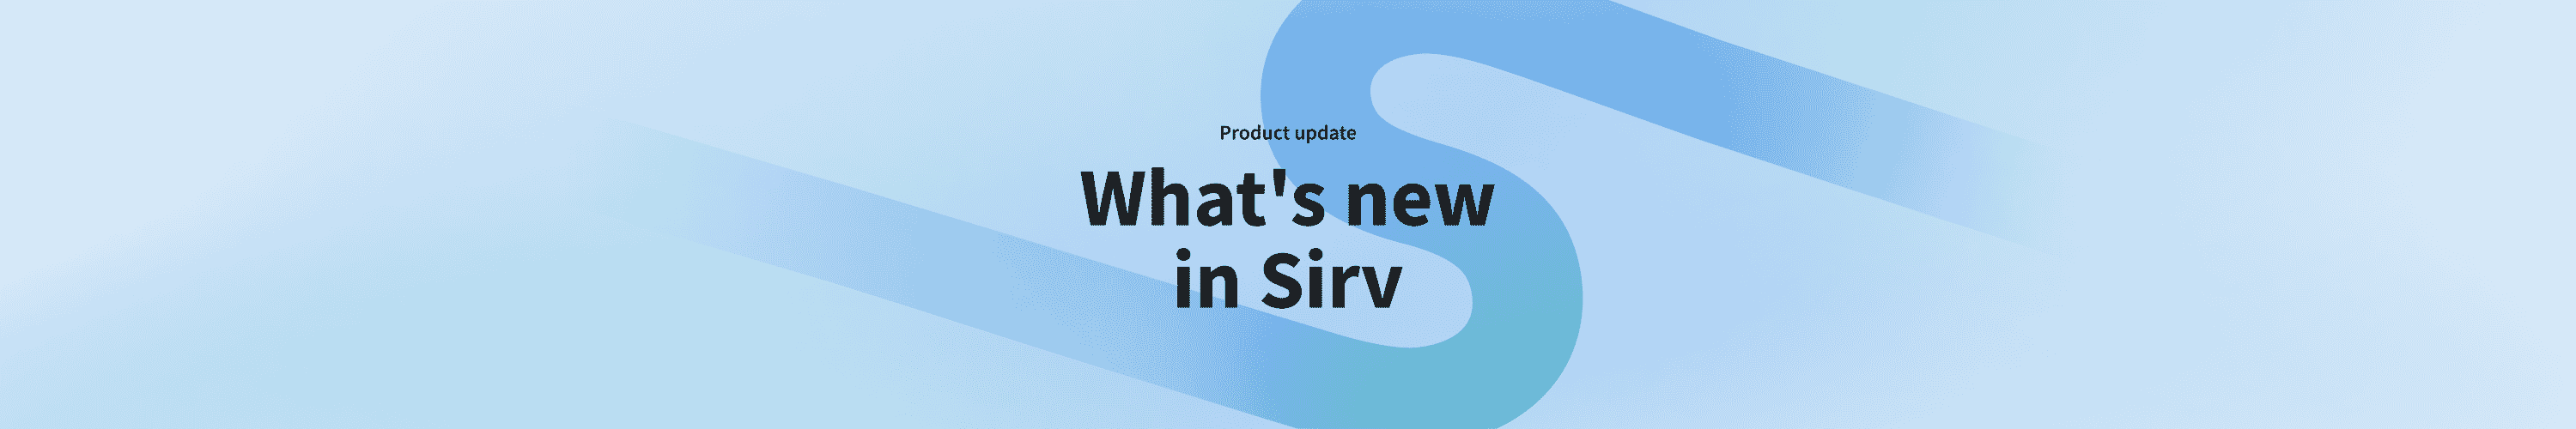 sirv product update graphic